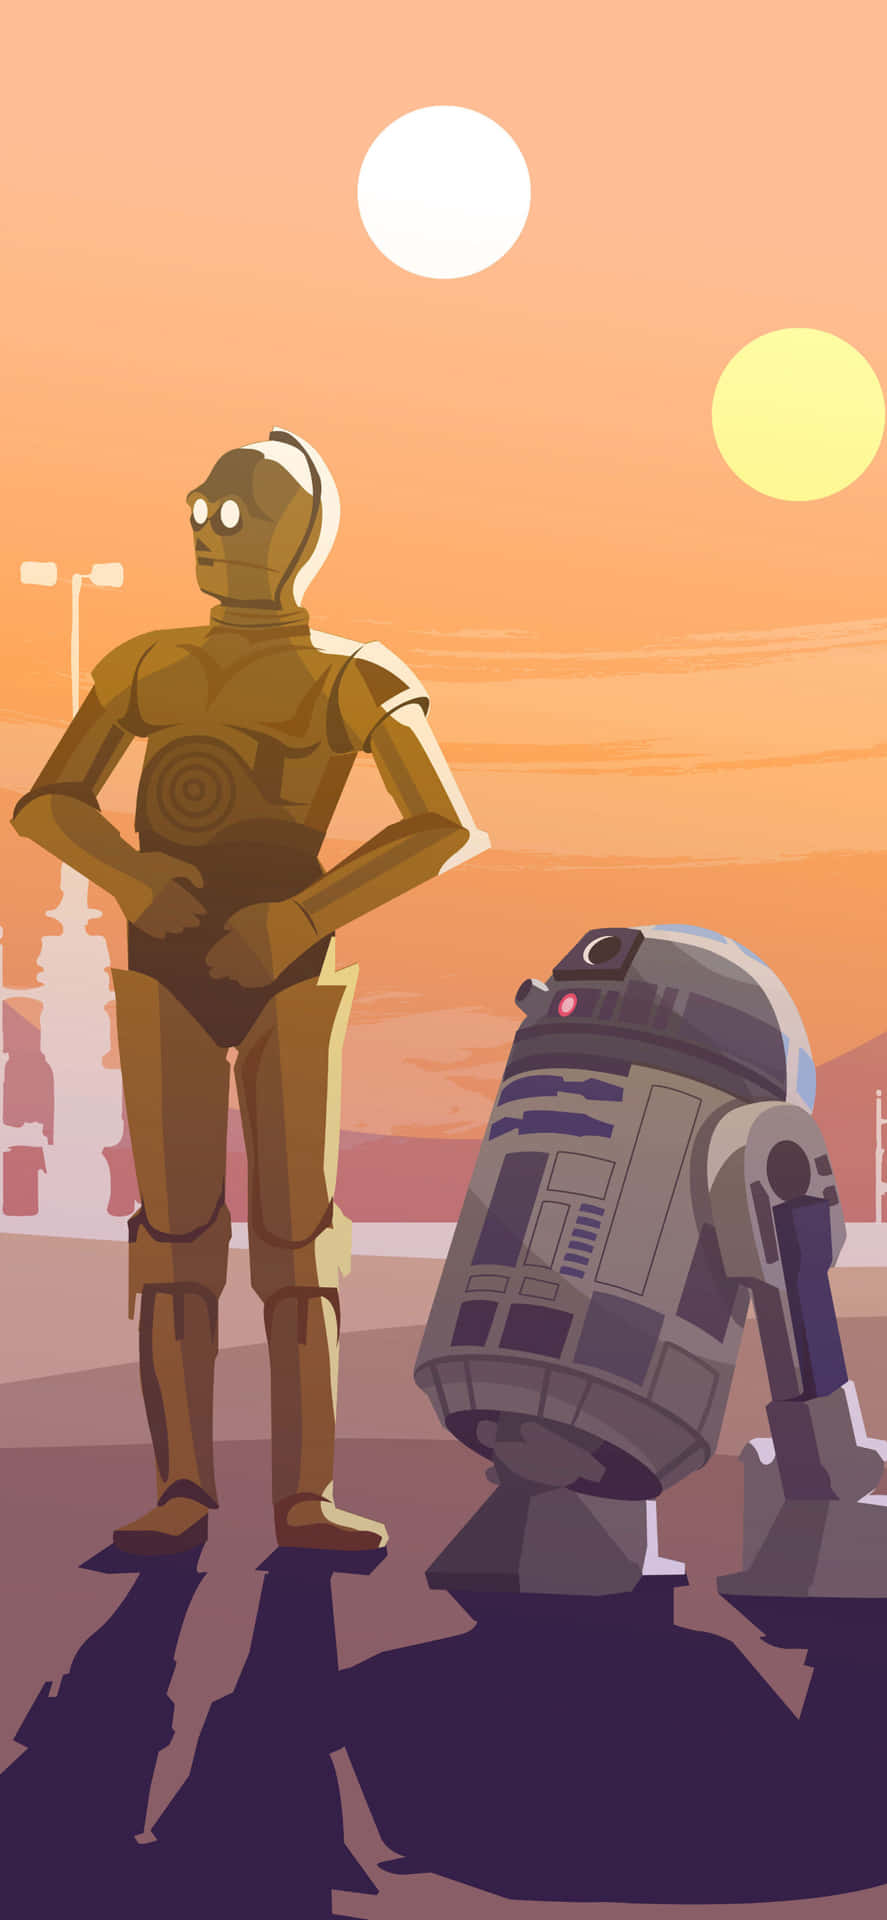 A hero to many, R2-D2 is here! Wallpaper